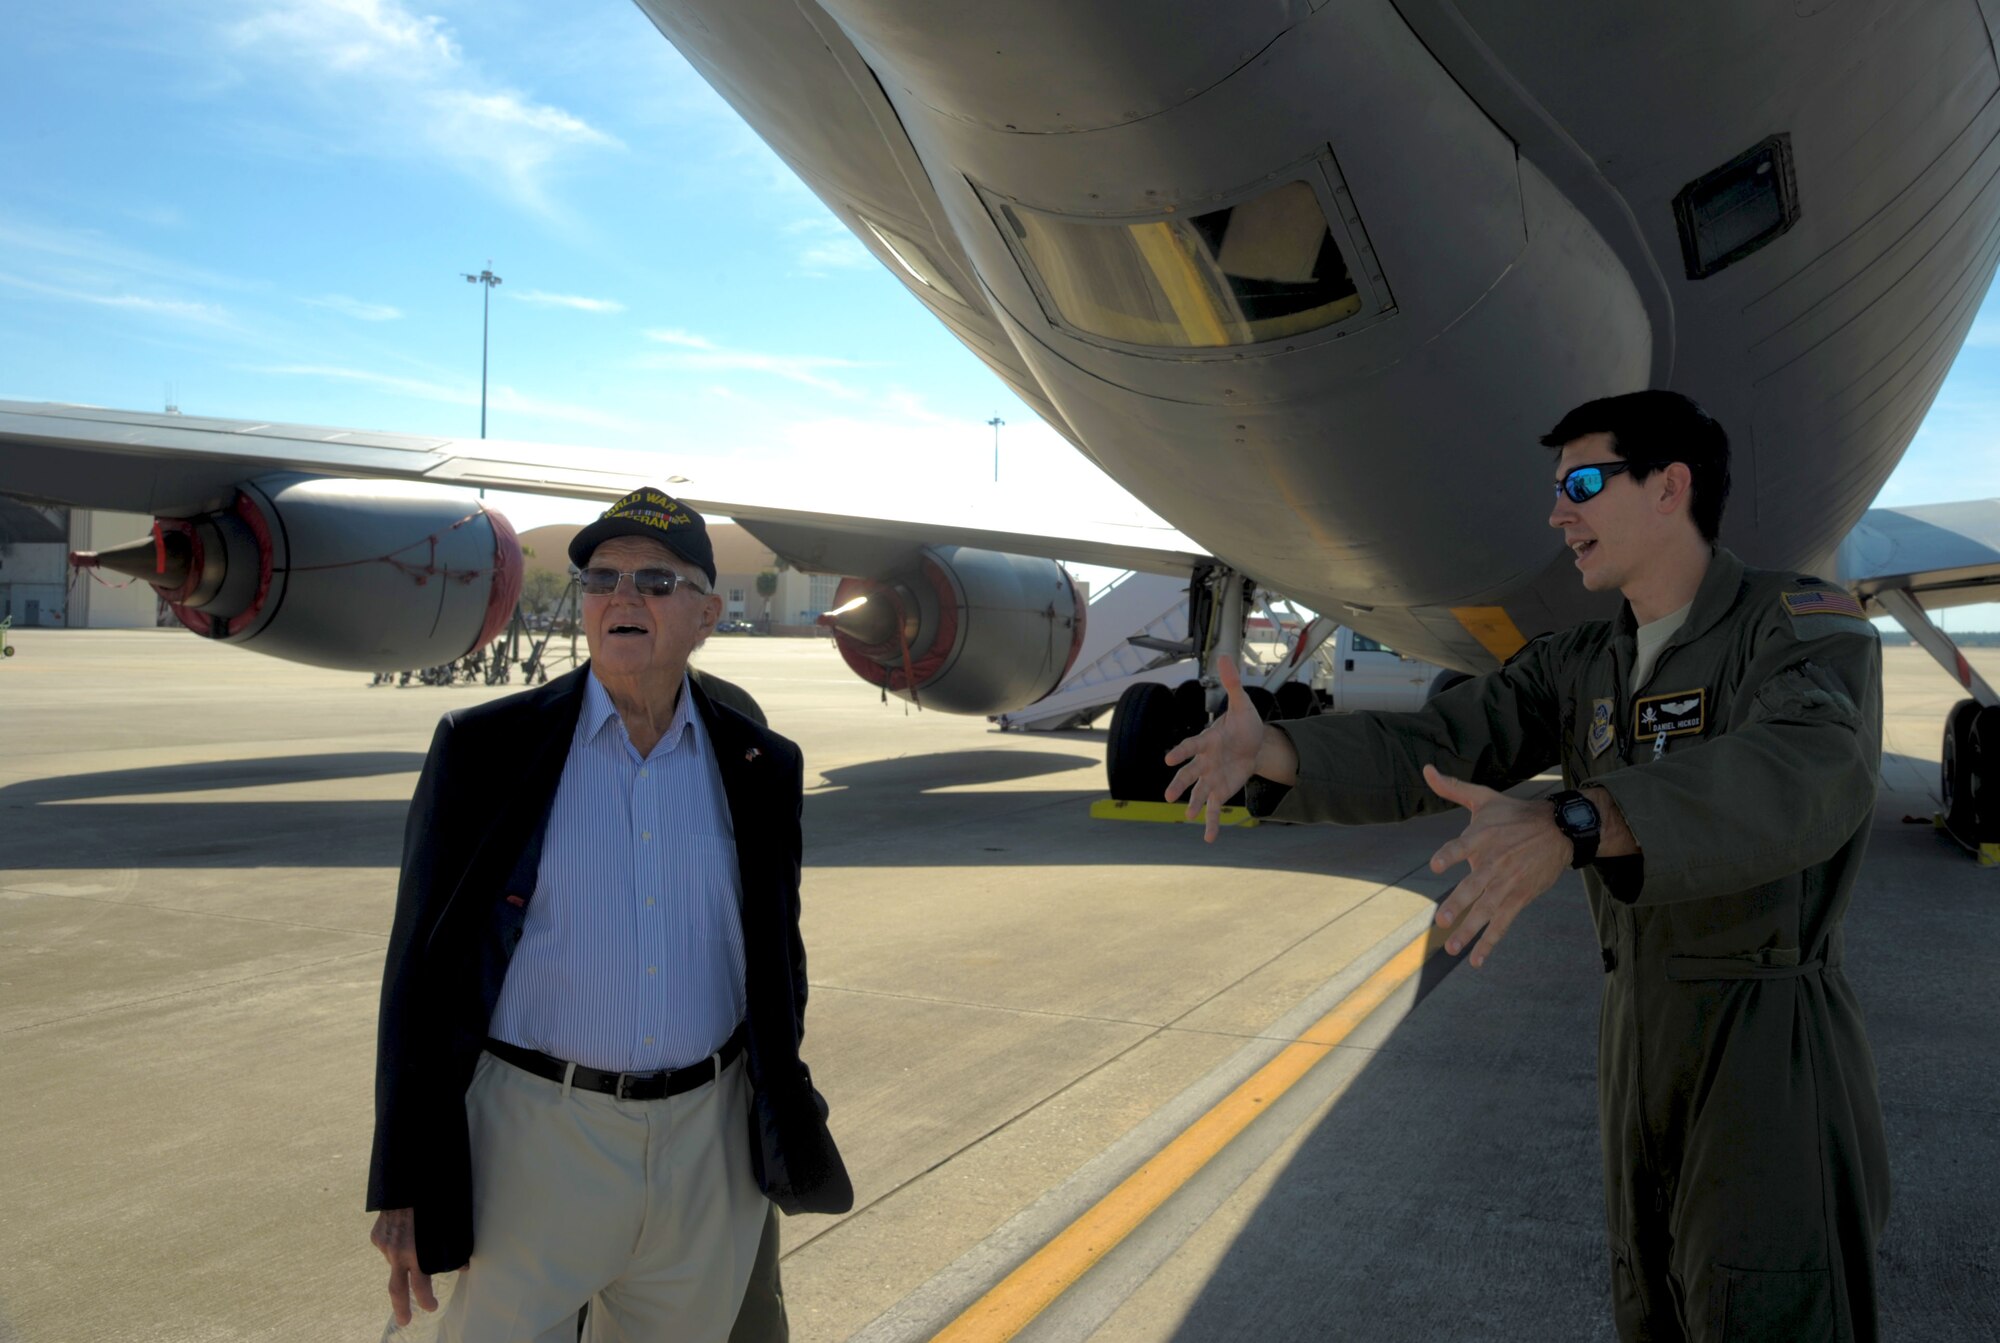 Capt. Daniel Hickox (right), chief of readiness assigned to the 91st Air Refueling Squadron, explains the mission of a KC-135 Stratotanker to Keith Cole, a World War II veteran, at MacDill Air Force Base, Fla., Jan. 18, 2017. Cole was given a tour of the flightline and shown the inside of a KC-135. (U.S. Air Force photo/Airman 1st Class Adam R. Shanks)